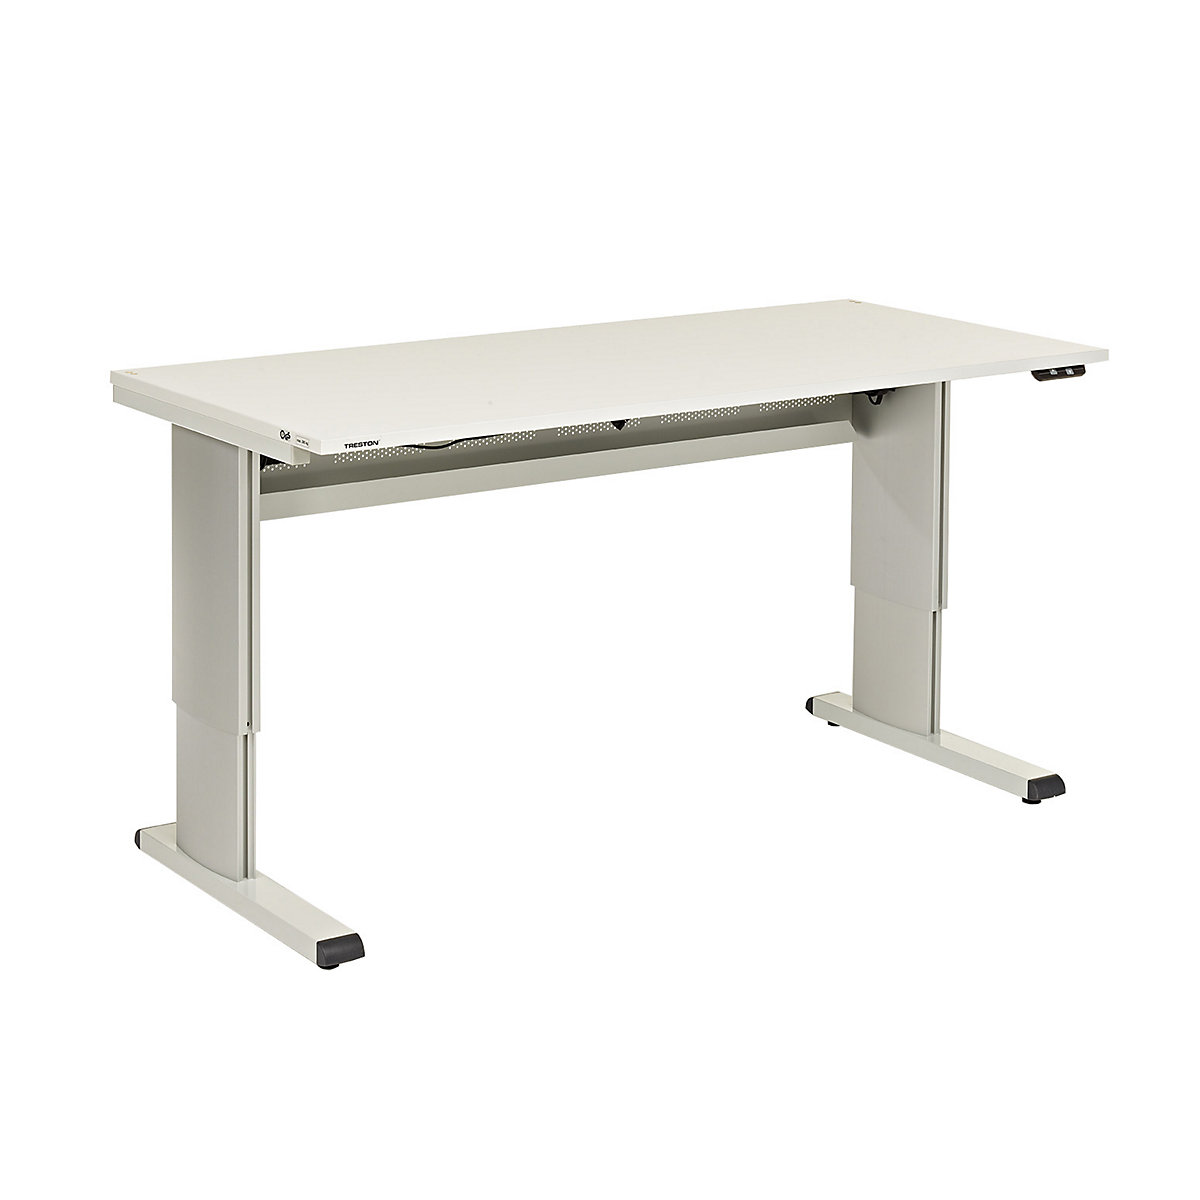 WB workbench – Treston, with electric height adjustment, WxD 1500 x 800 mm-7